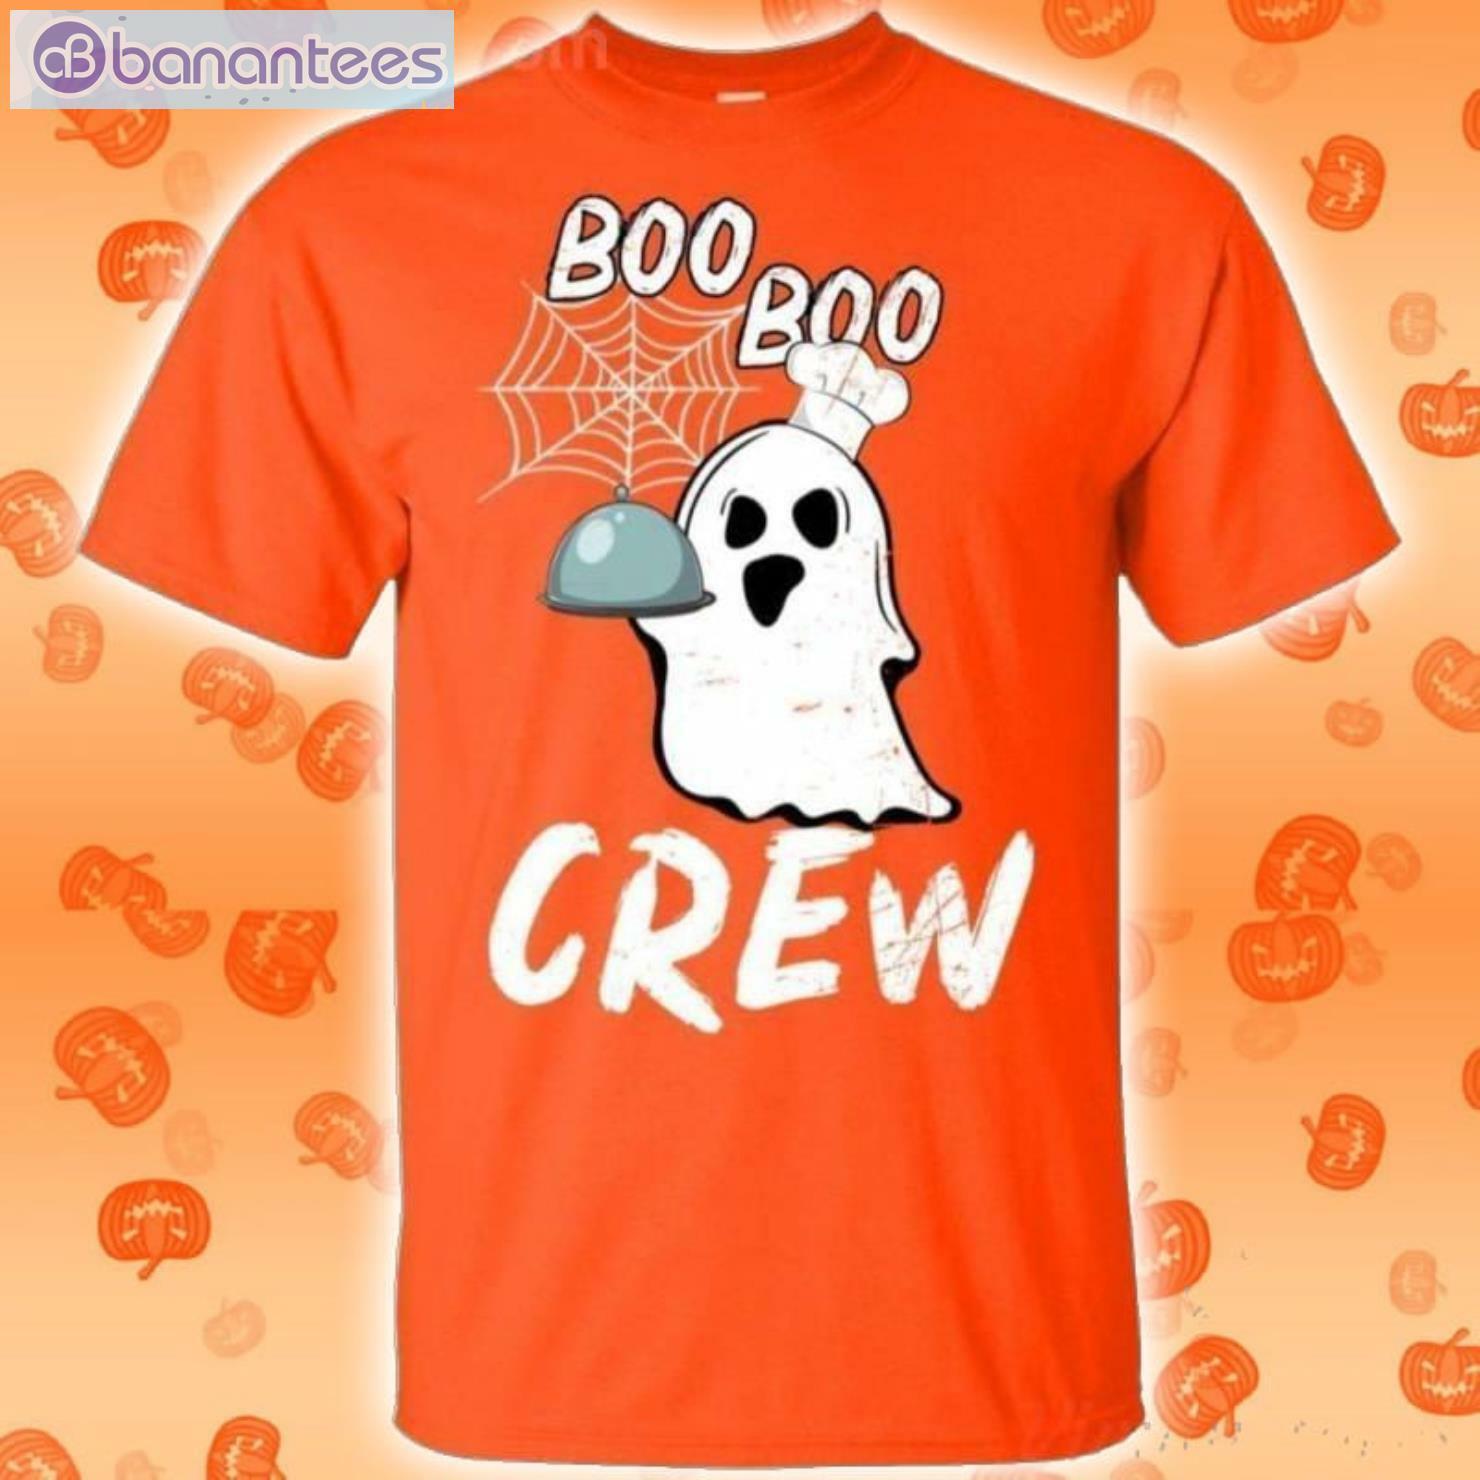 Cook Ghost Boo Boo Crew Halloween T-Shirt Product Photo 2 Product photo 2